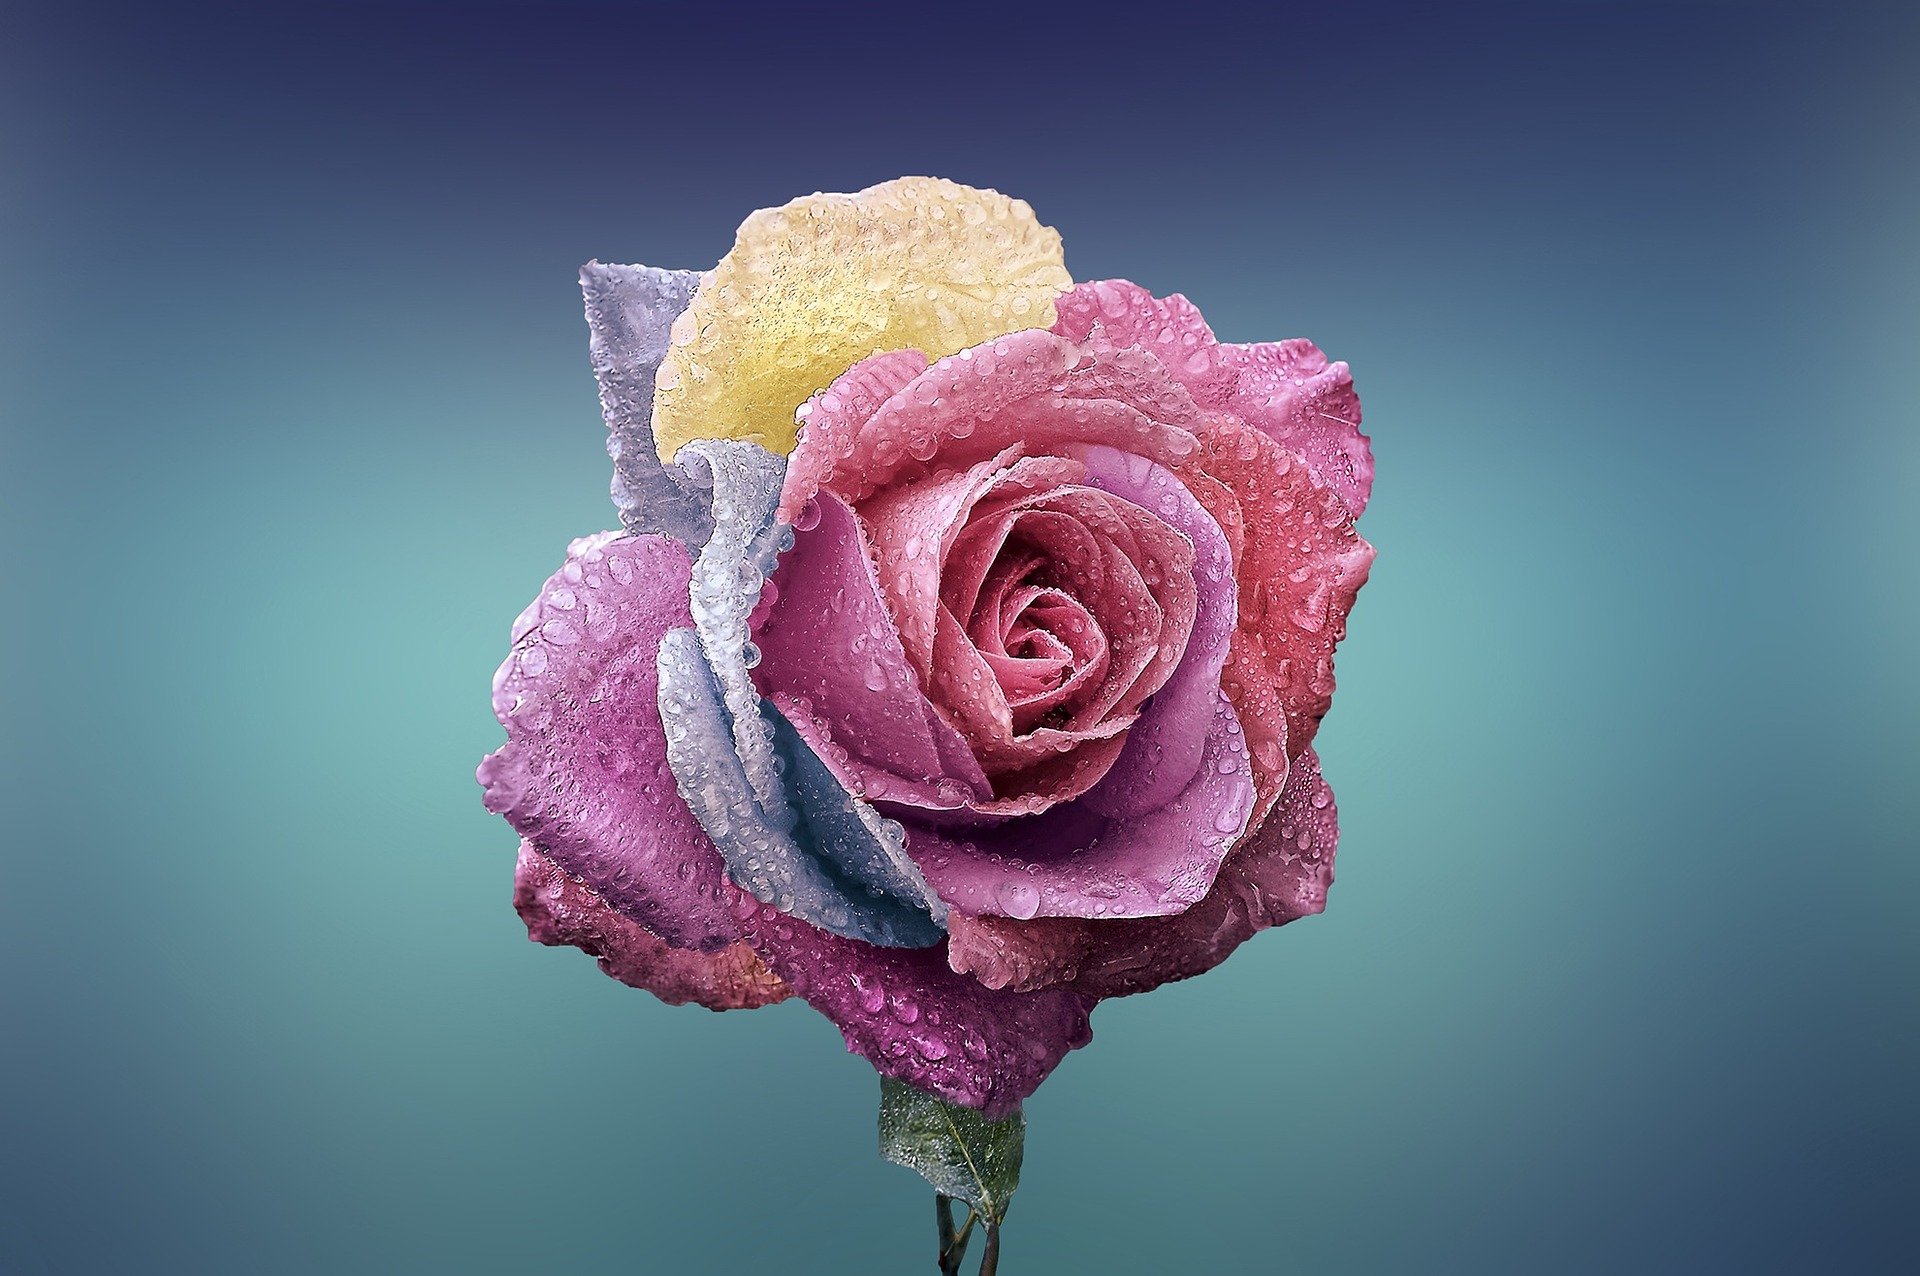 exquisitely beautiful rose with yellow, pink and purple petals